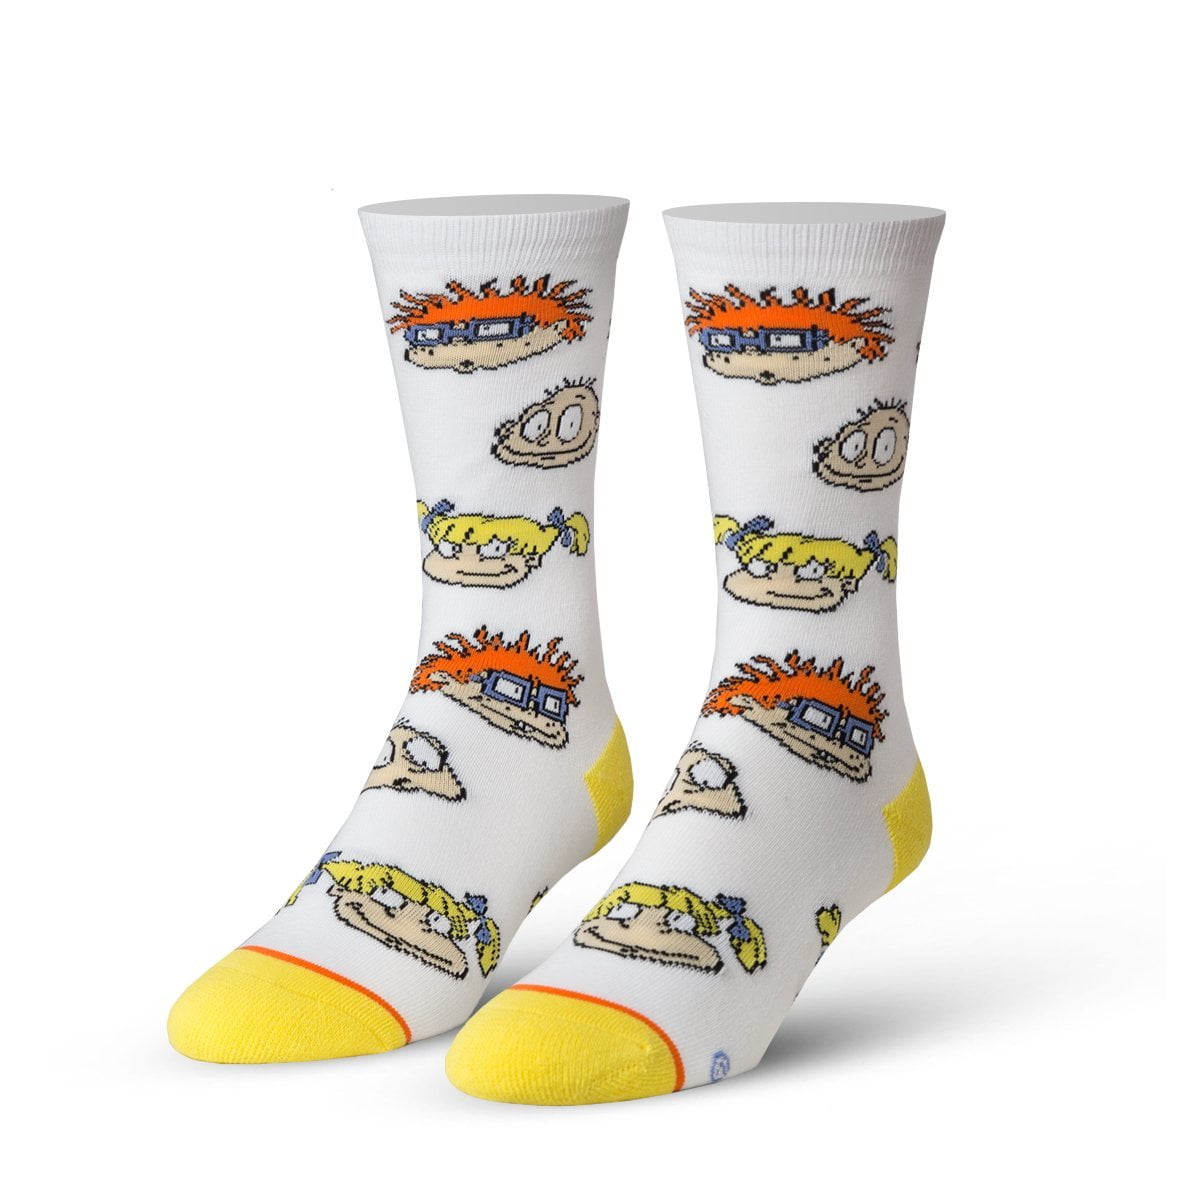 Pack of 6 Pairs of Socks THE SIMPSON Printed Image Soft Elegant and Durable